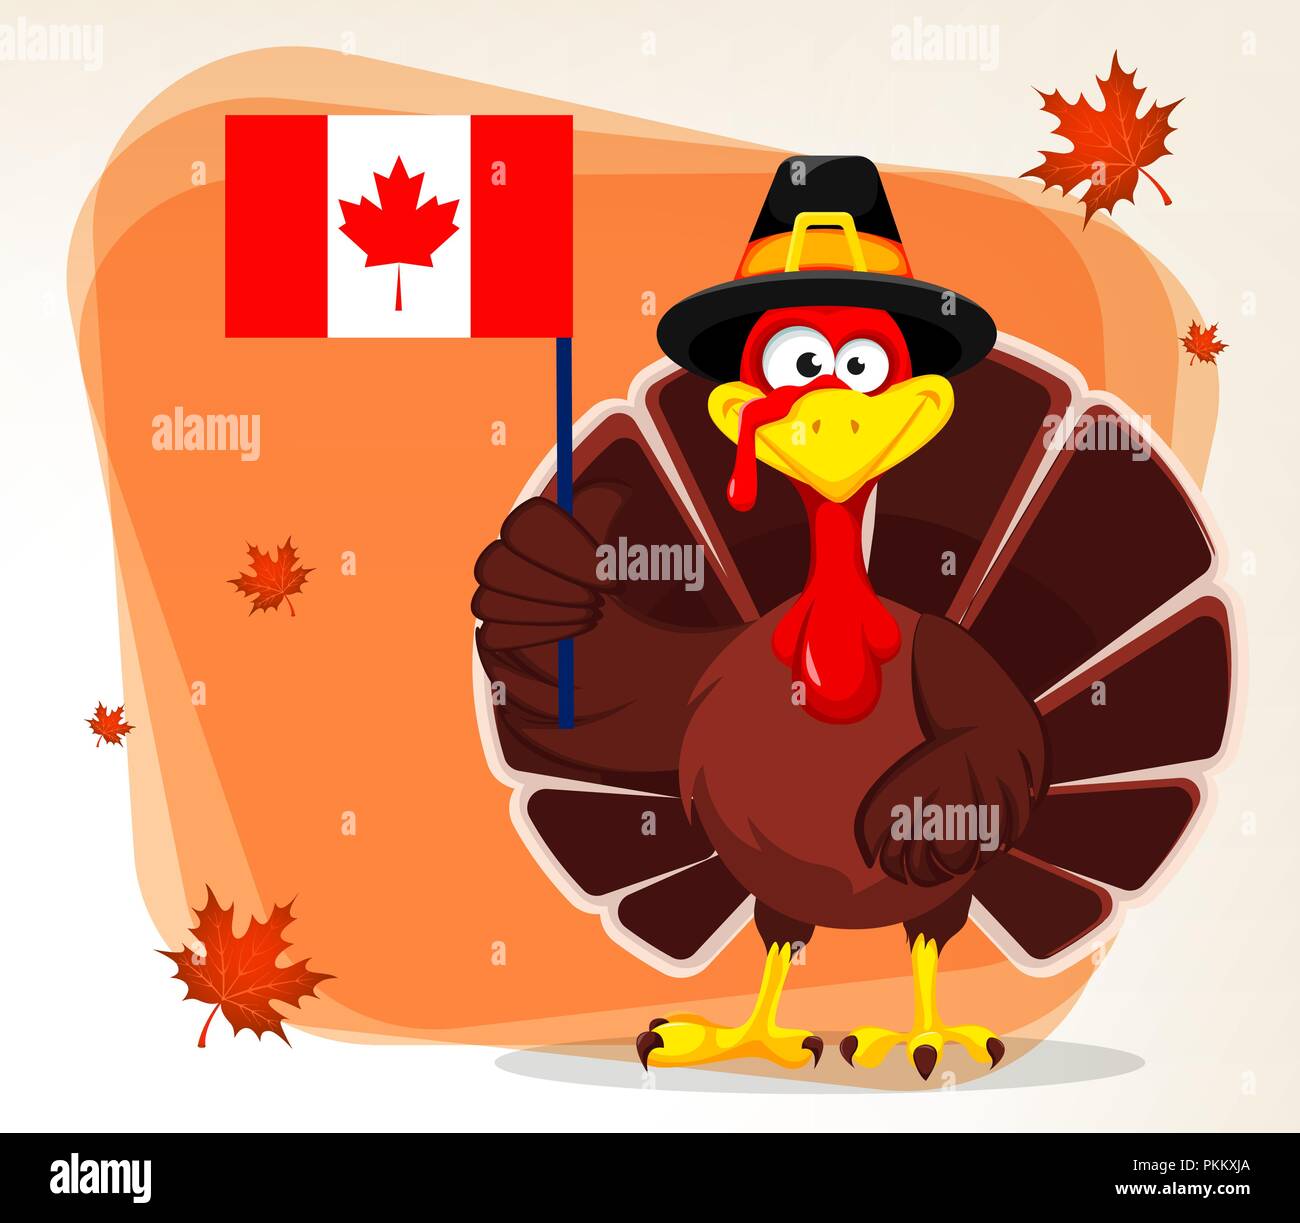 Thanksgiving greeting card with a turkey bird wearing a Pilgrim hat and holding Canadian national flag. Vector illustration on light background with m Stock Vector